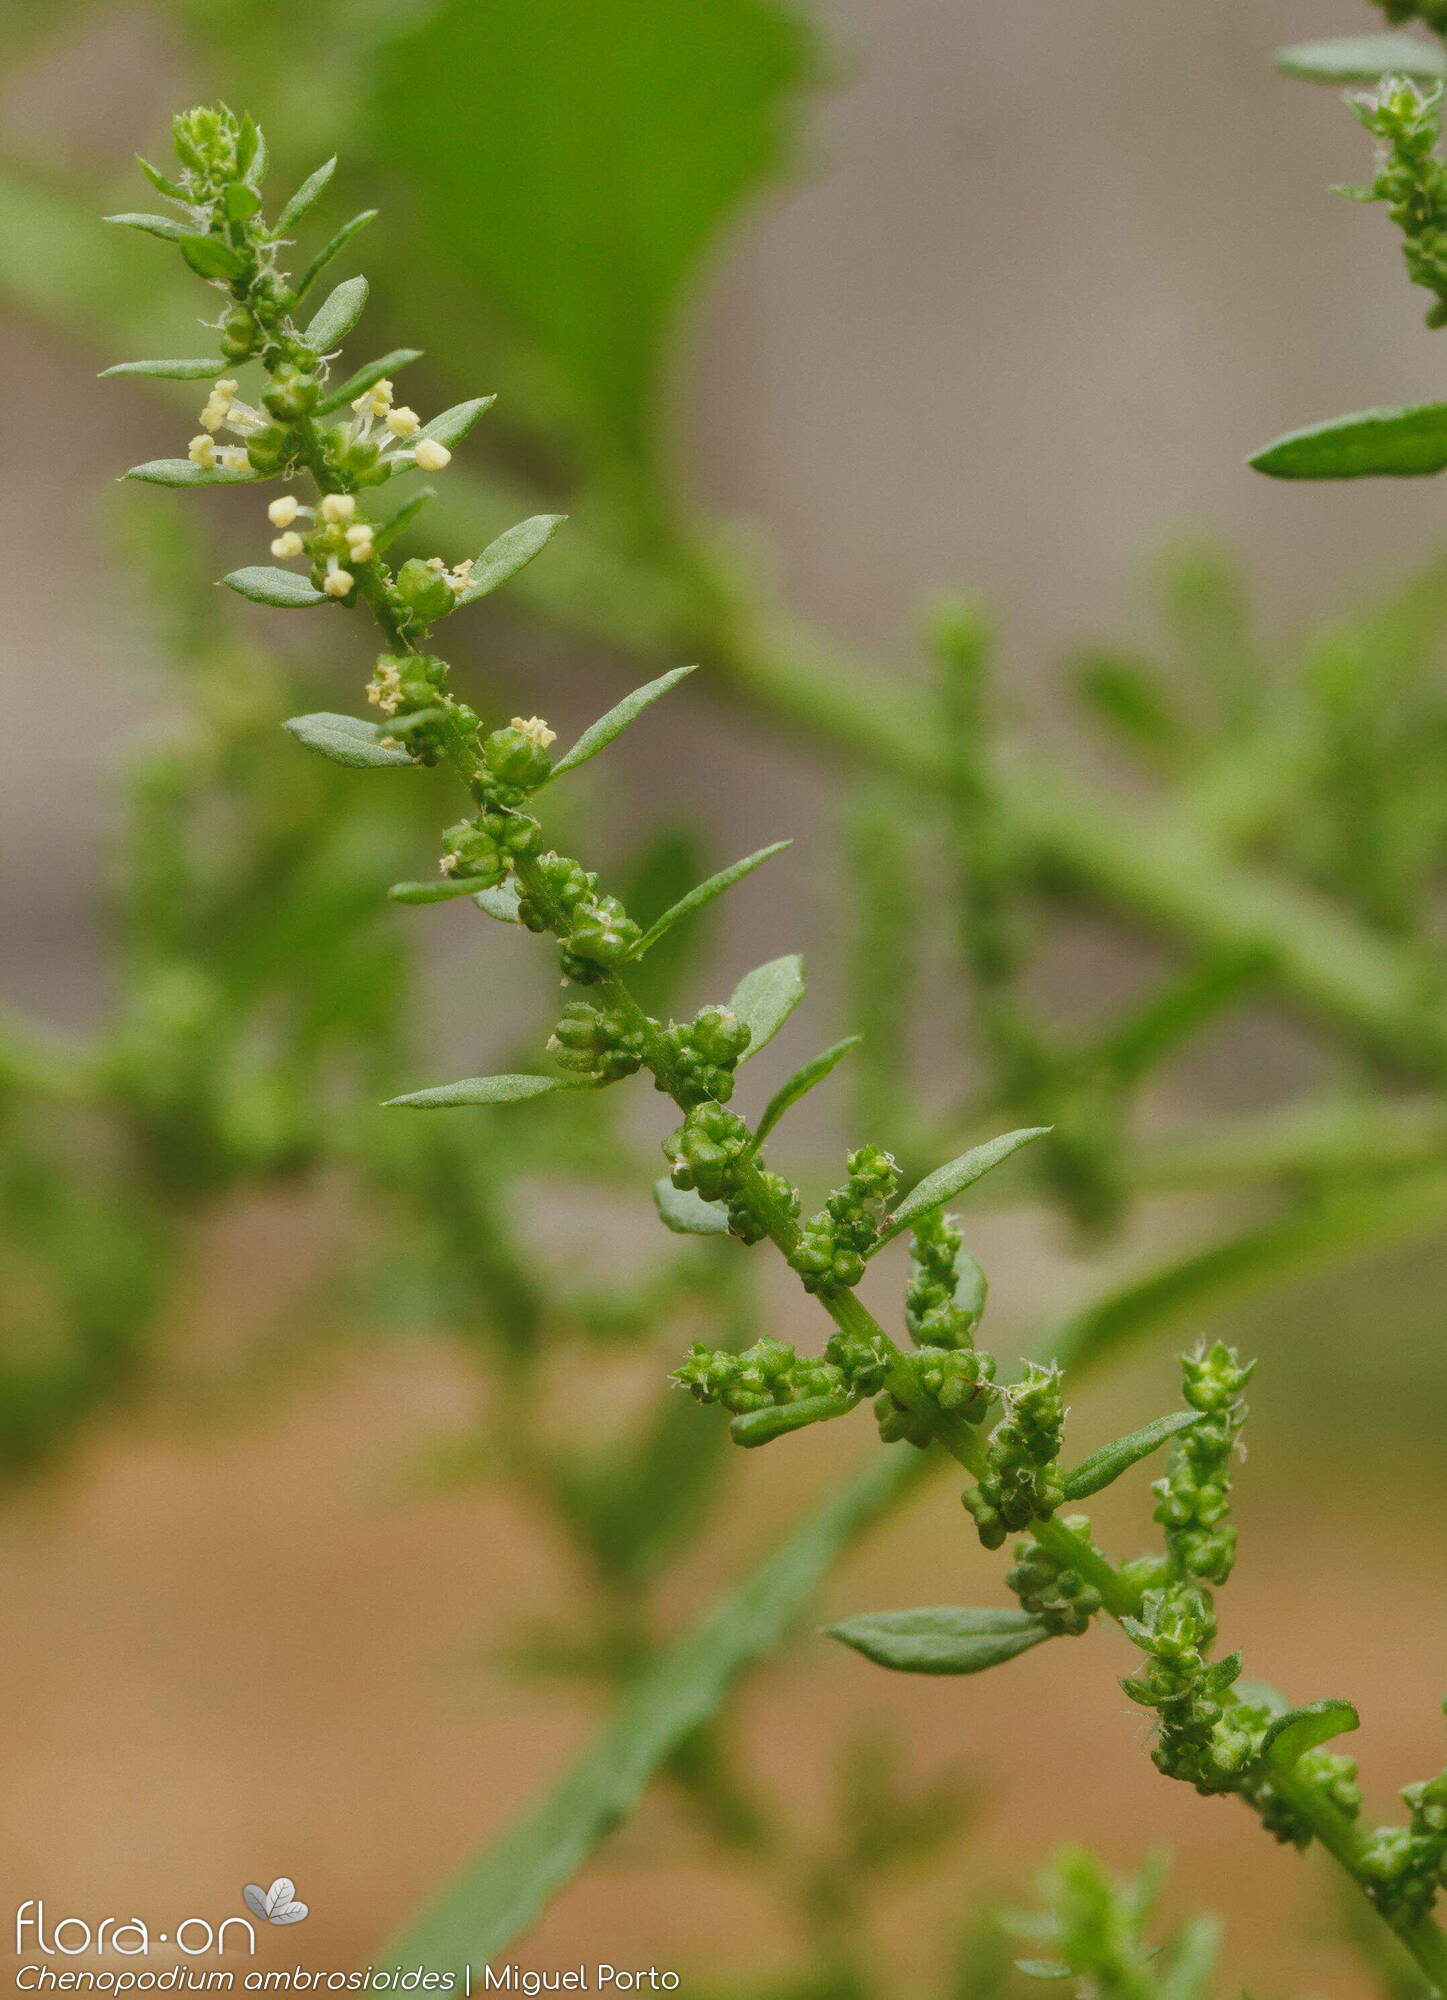 Chenopodium ambrosioides - Flor (geral) | Miguel Porto; CC BY-NC 4.0